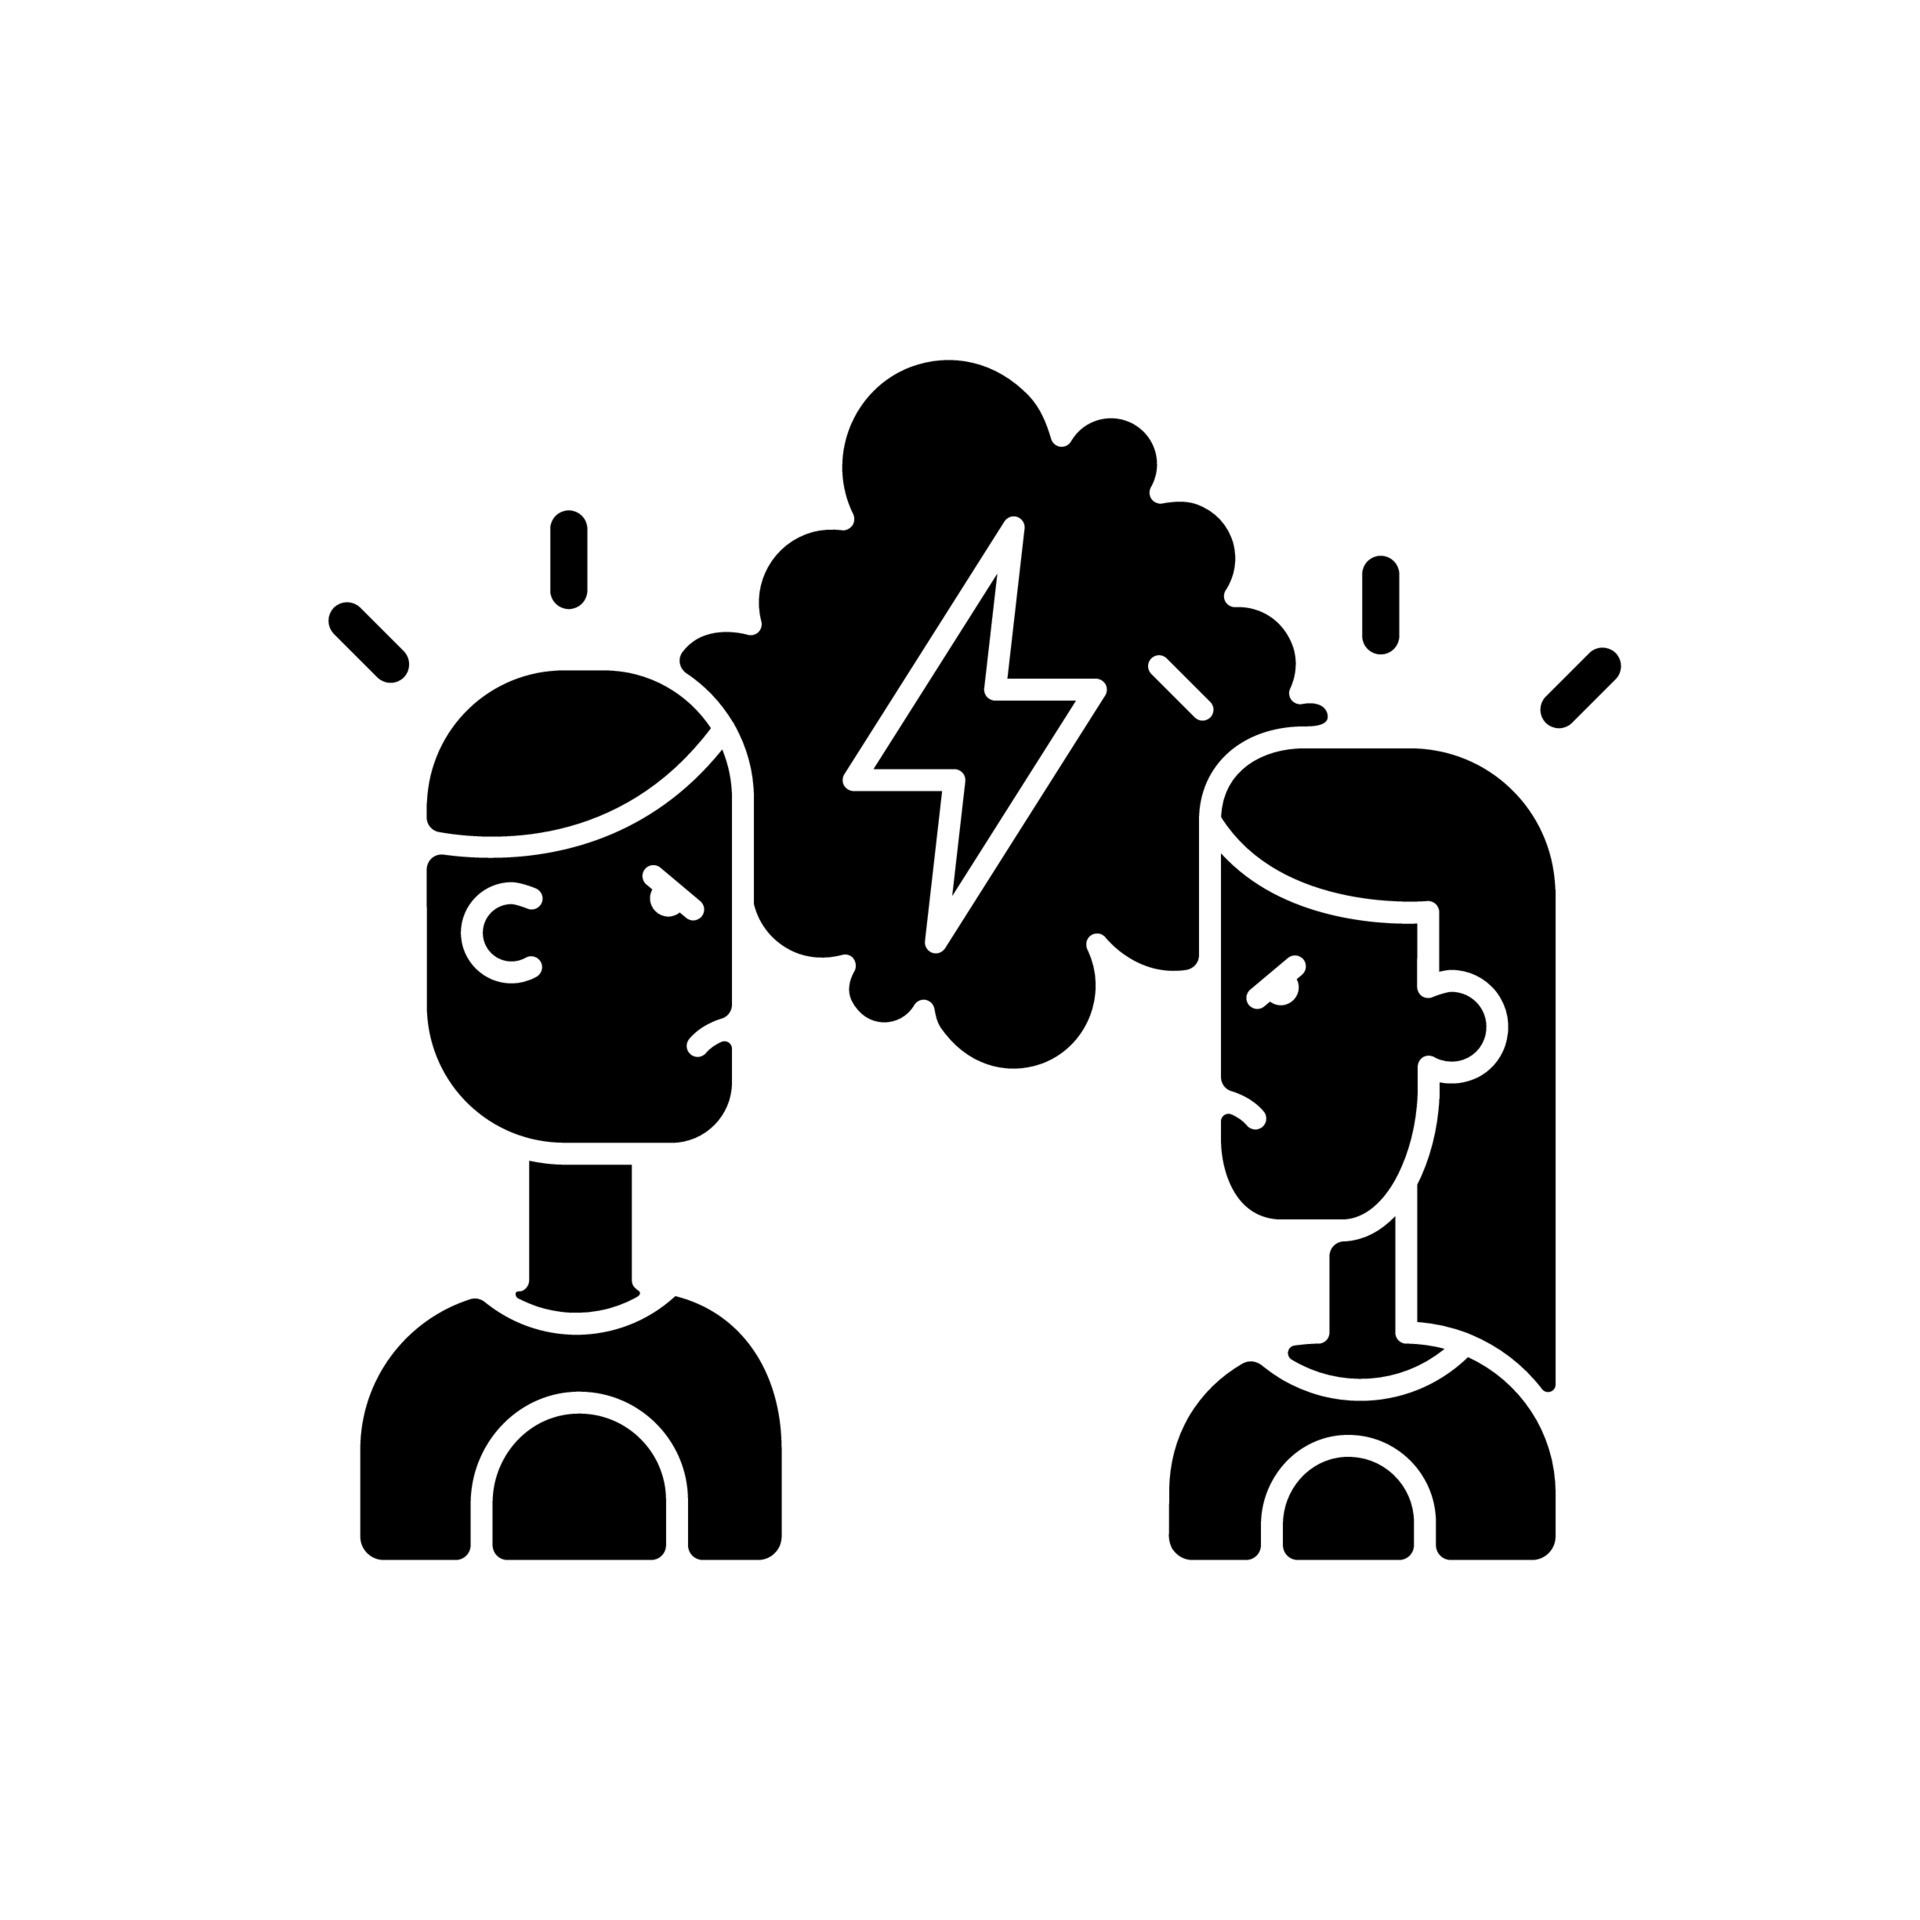 Quarreling couple black glyph icon. Angry girlfriend and boyfriend